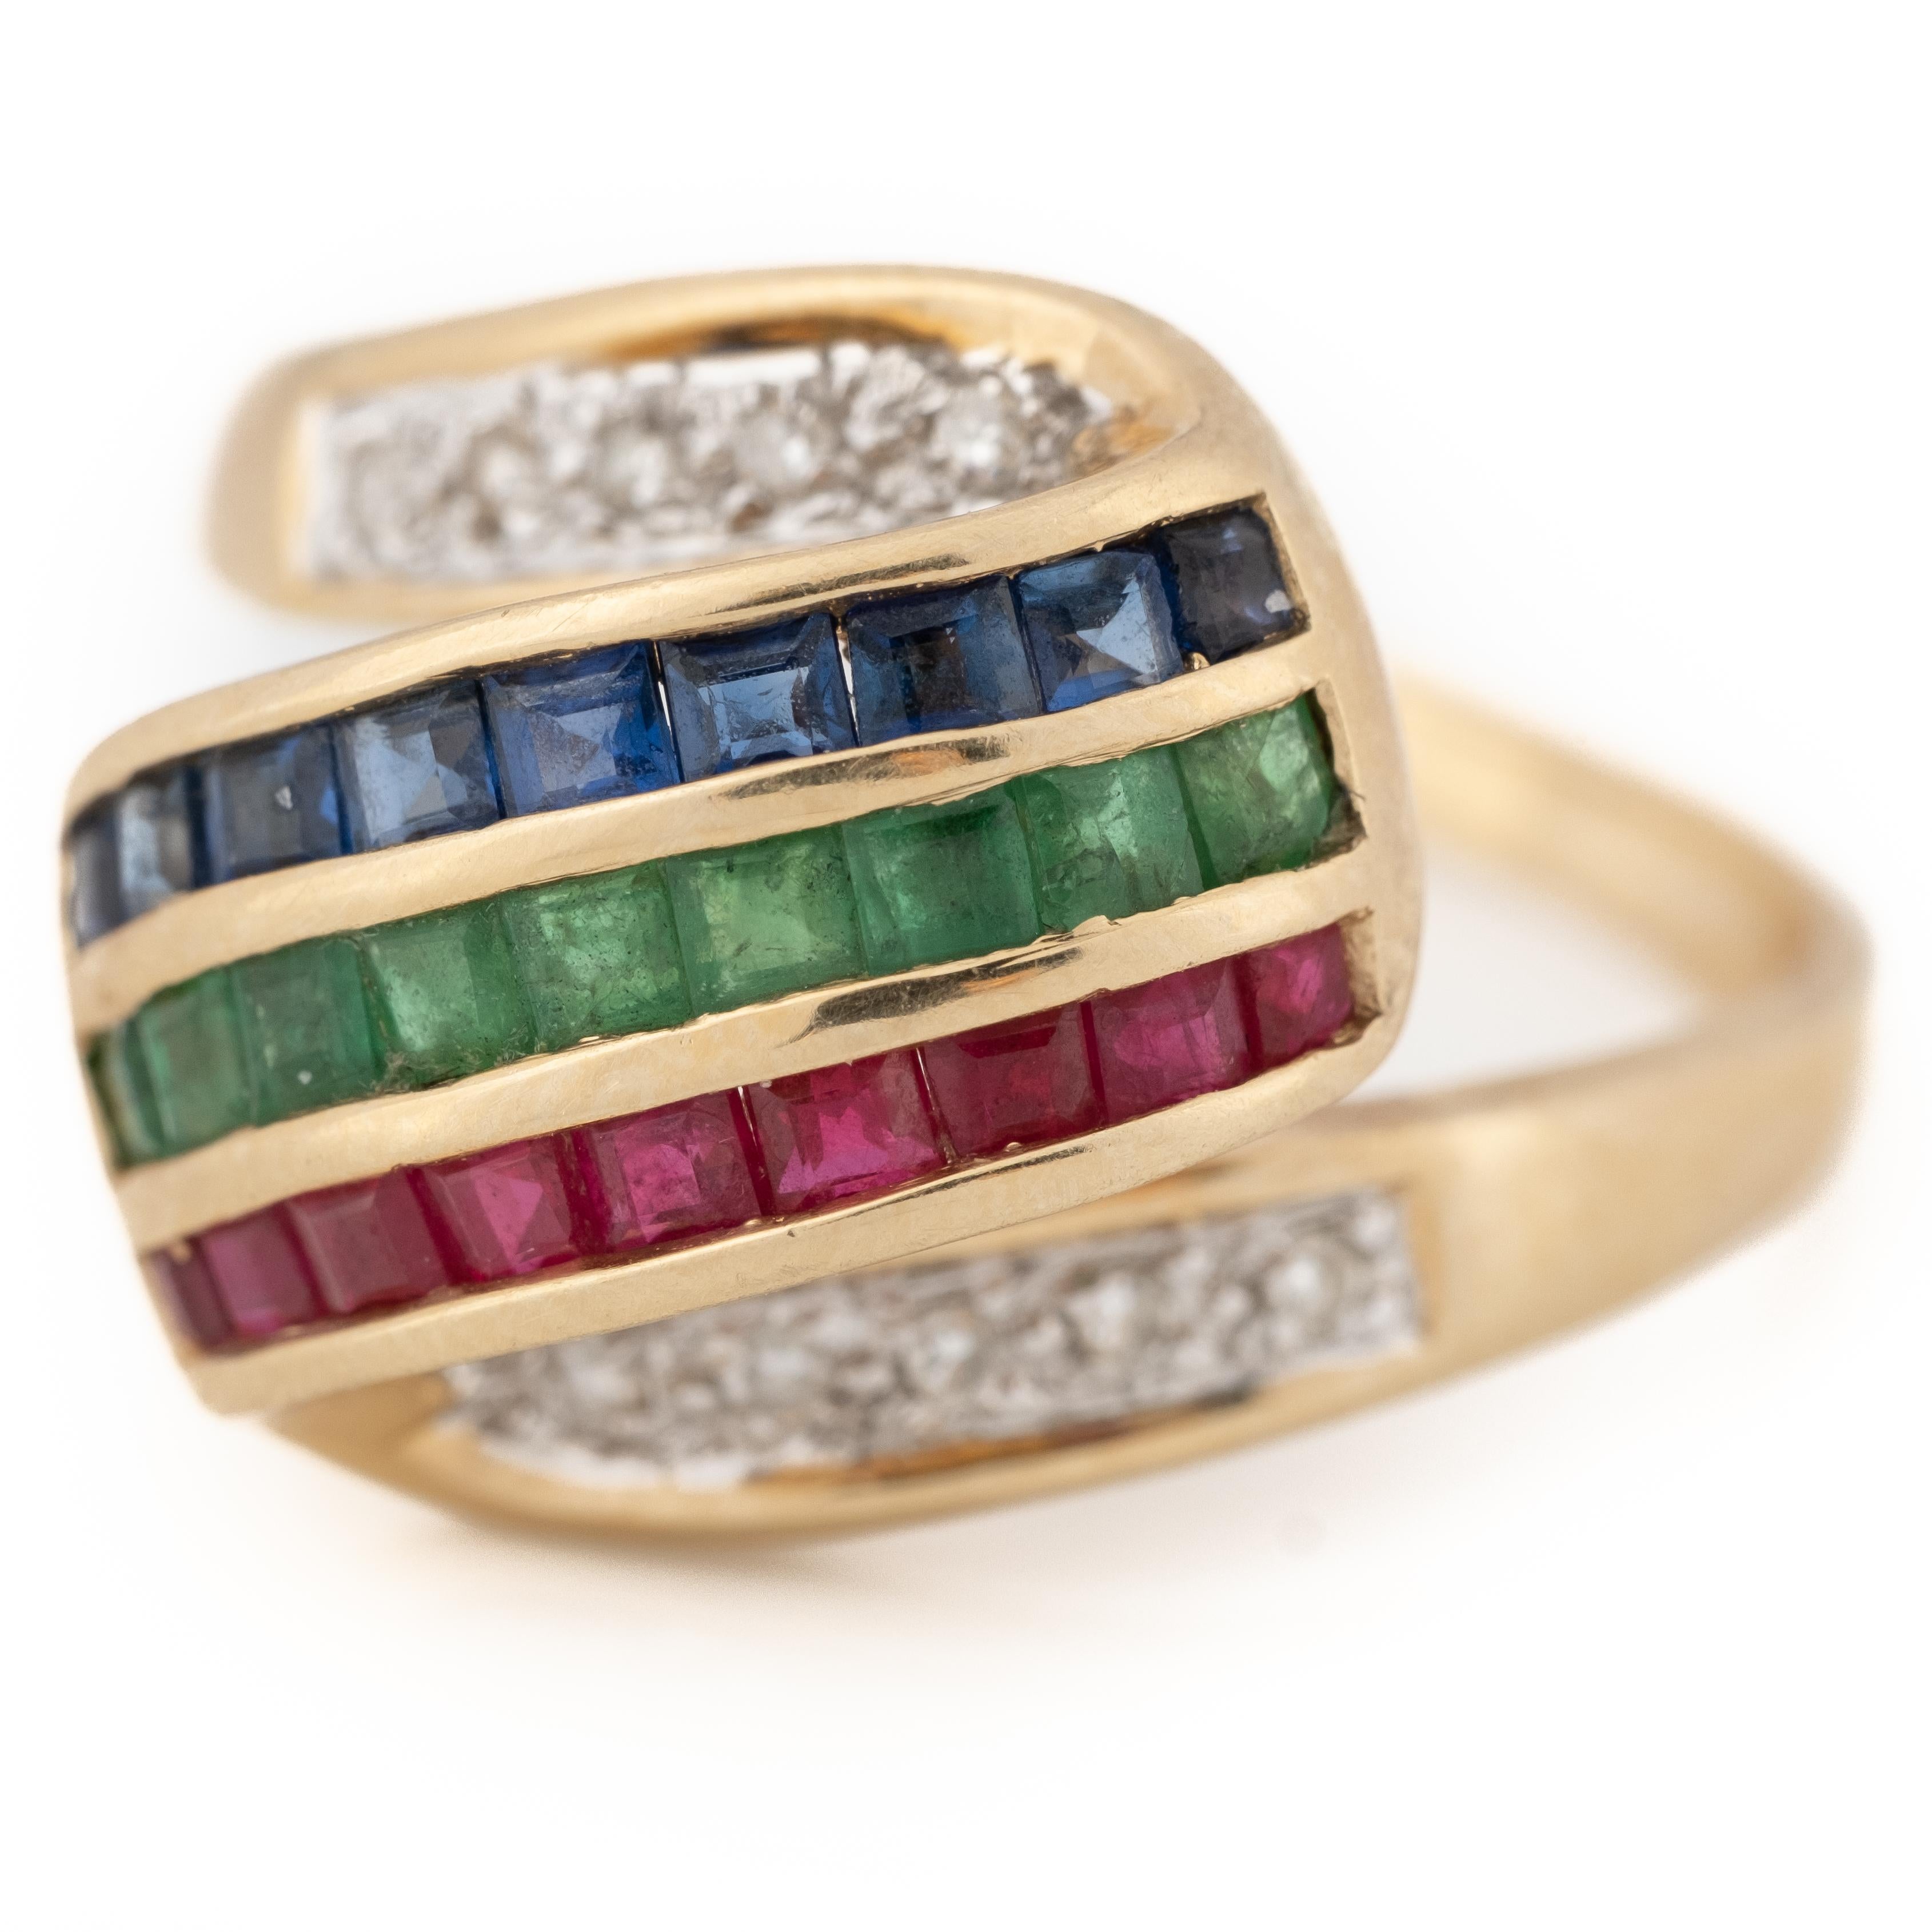 14k gold ring with ruby, emerald, sapphire and approx. 0.05ctw in diamonds. Ring size - 8.5, ring top is 17mm wide. marked: 585. Weight - 3.3 DWT.